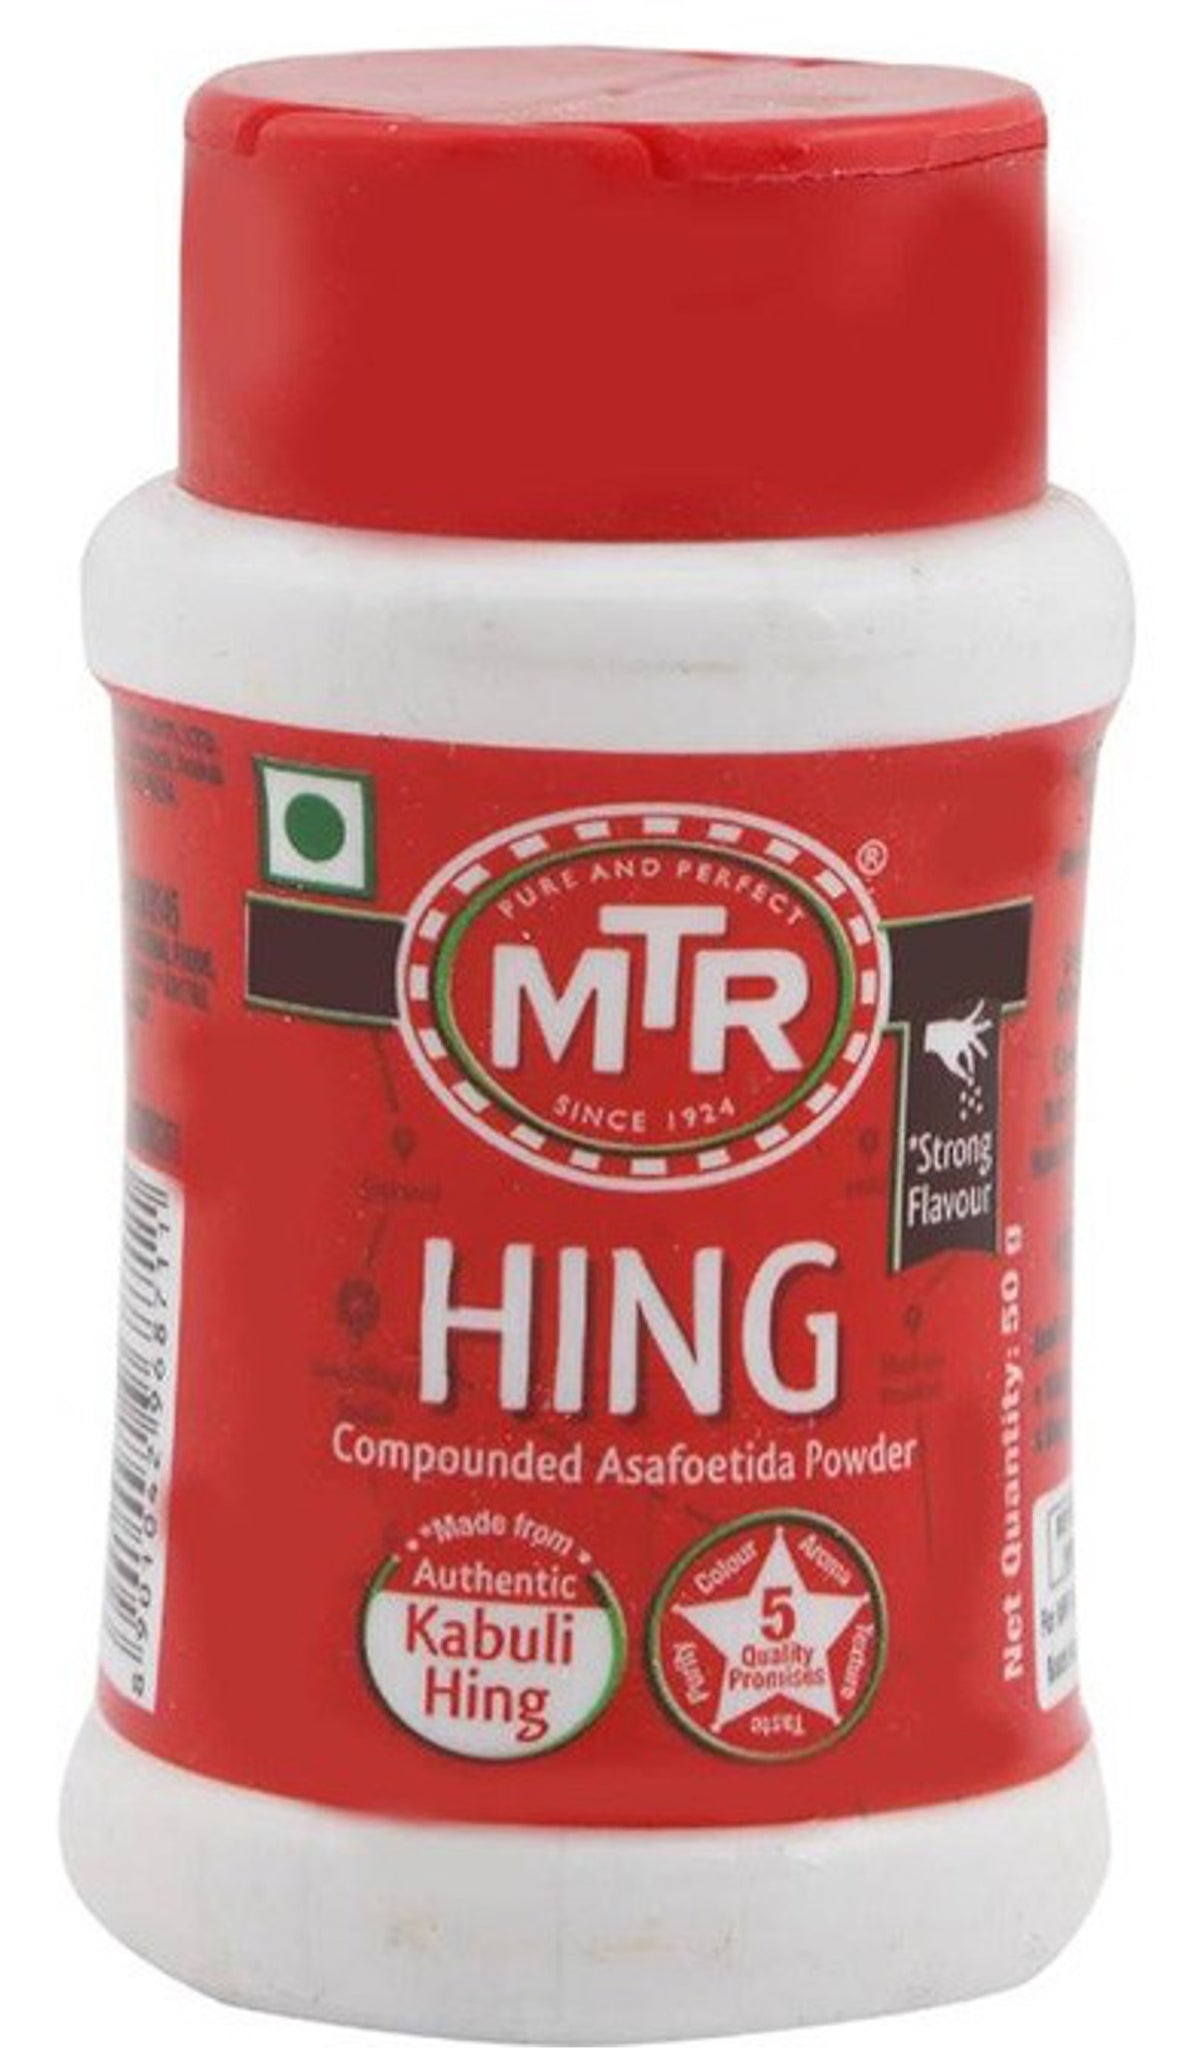 Hing Compounded Asafoedia Powder